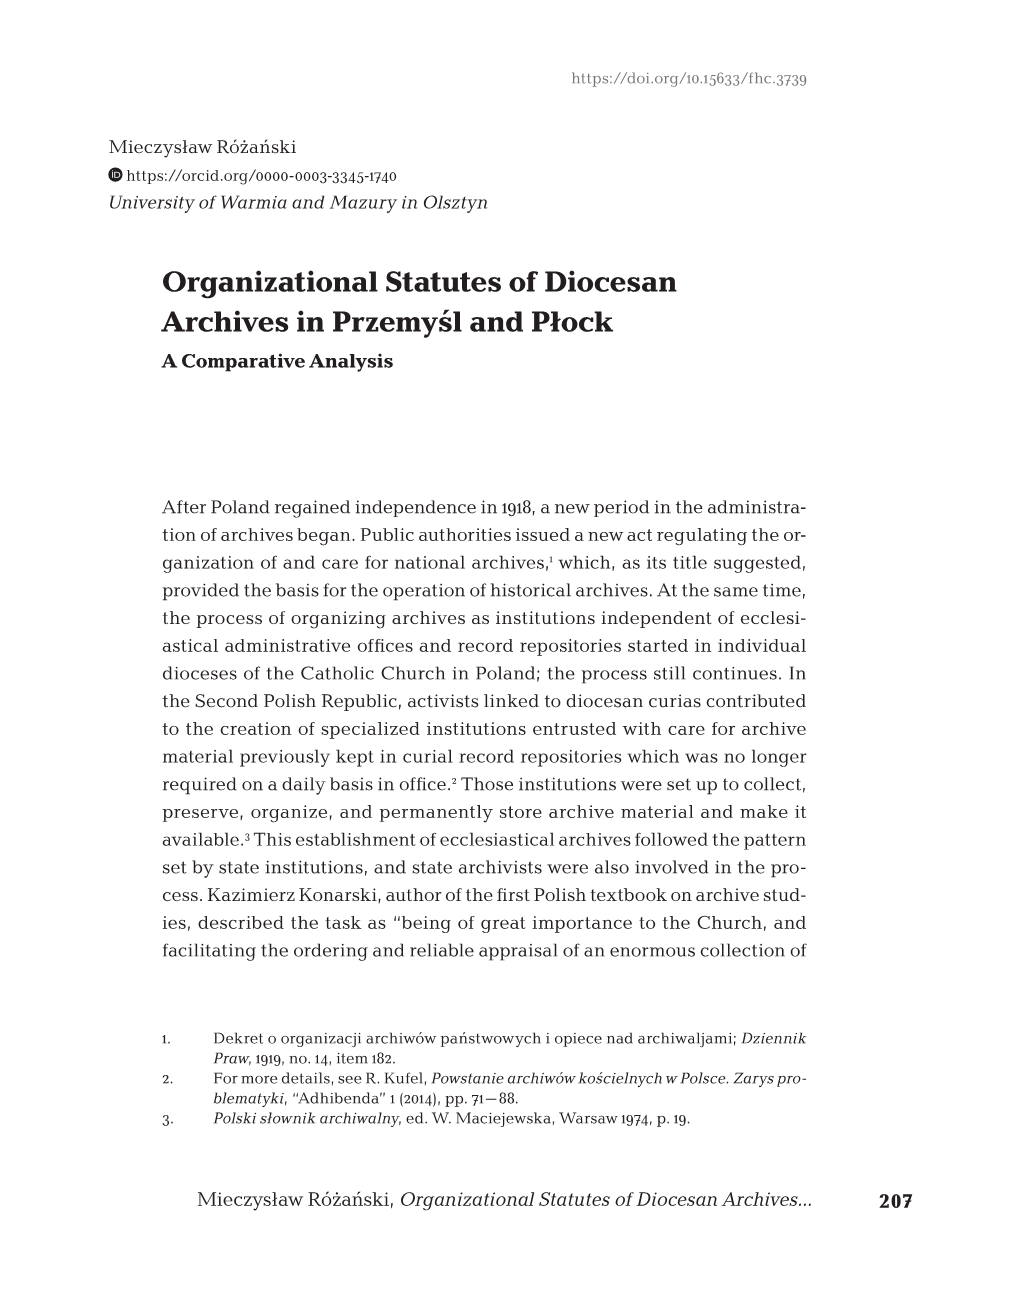 Organizational Statutes of Diocesan Archives in Przemyśl and Płock a Comparative Analysis